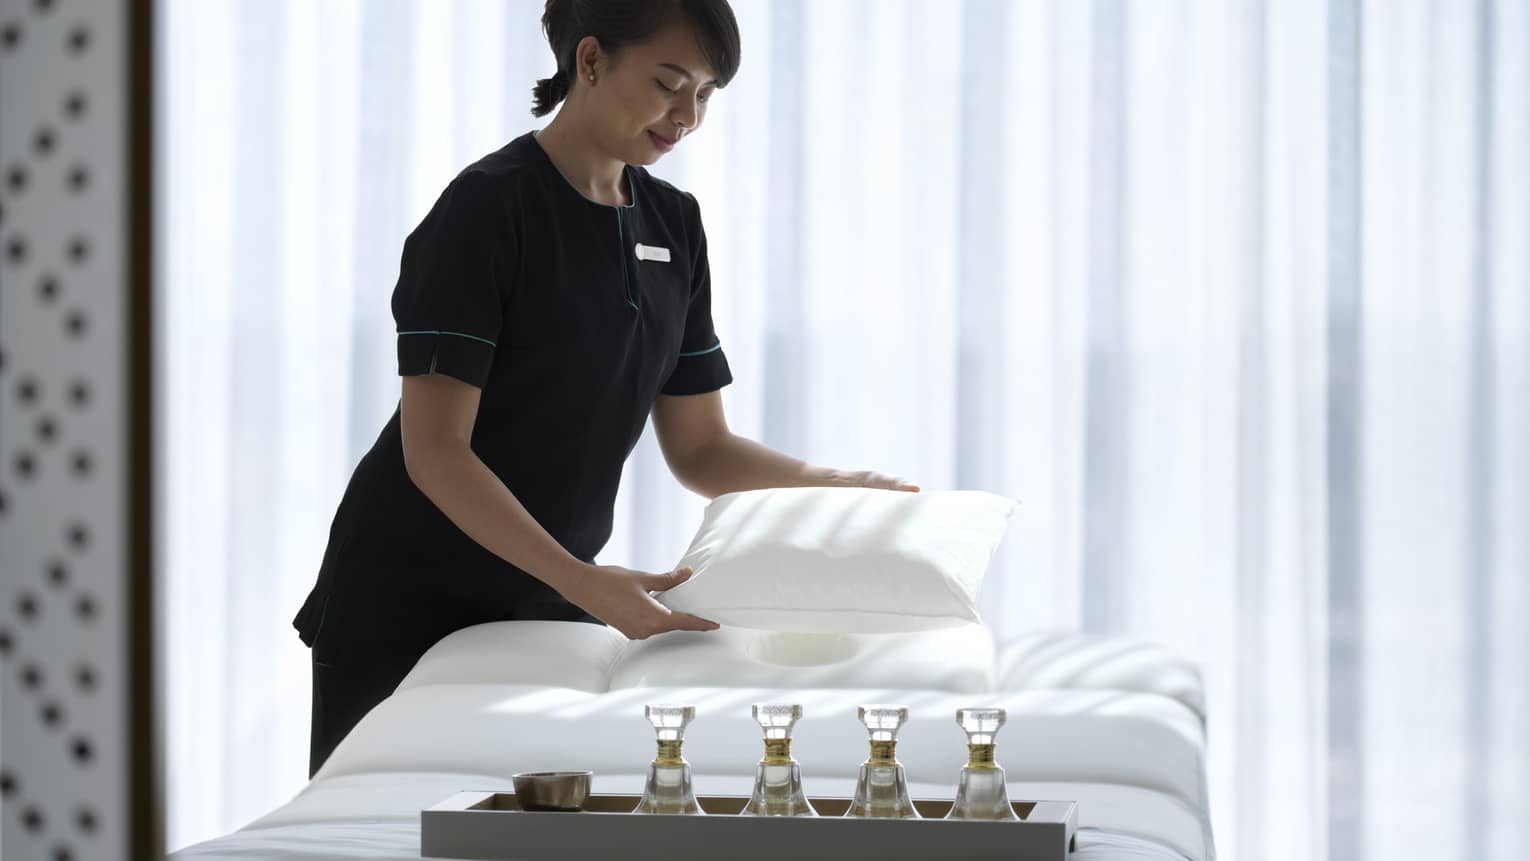 Spa attendant wearing a black uniform fluffs a while pillow on a treatment table covered with all-white linens and a tray filled with four small glass bottles